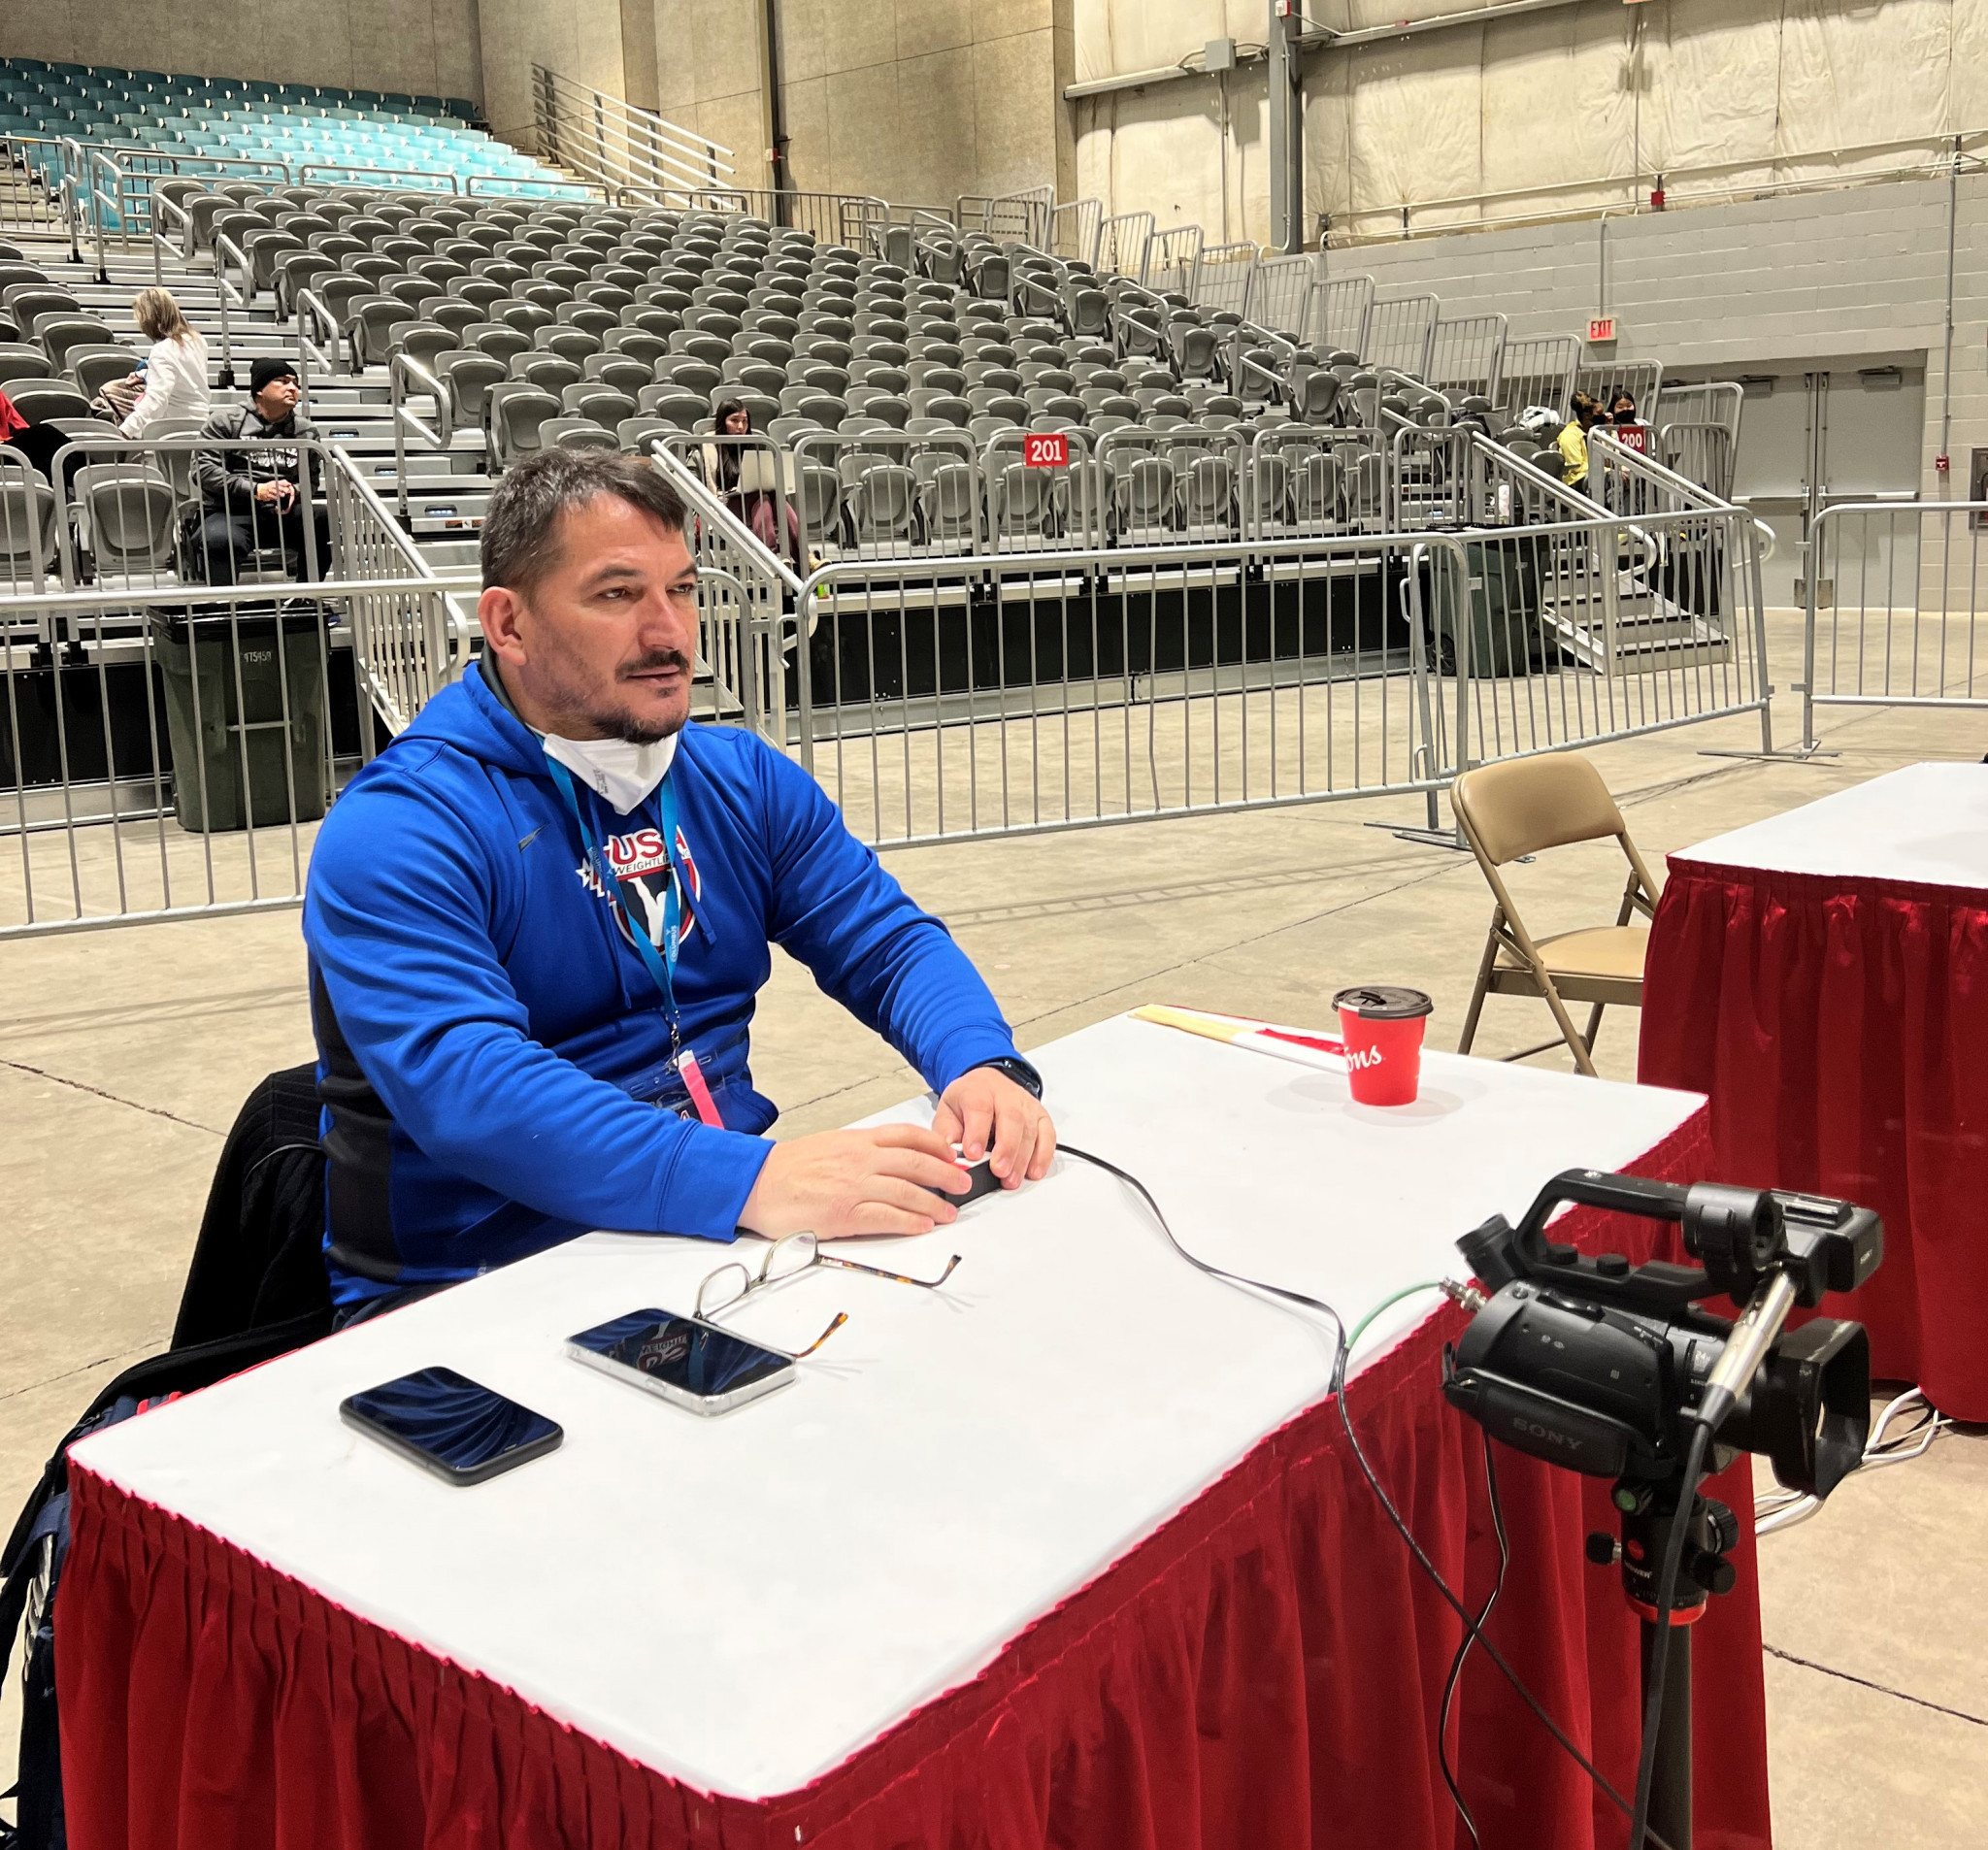 Three-time Olympic gold medallist and USAW’s technical director Pyrros Dimas was among the many officials at the Arnold Weightlifting Championships ©USAW